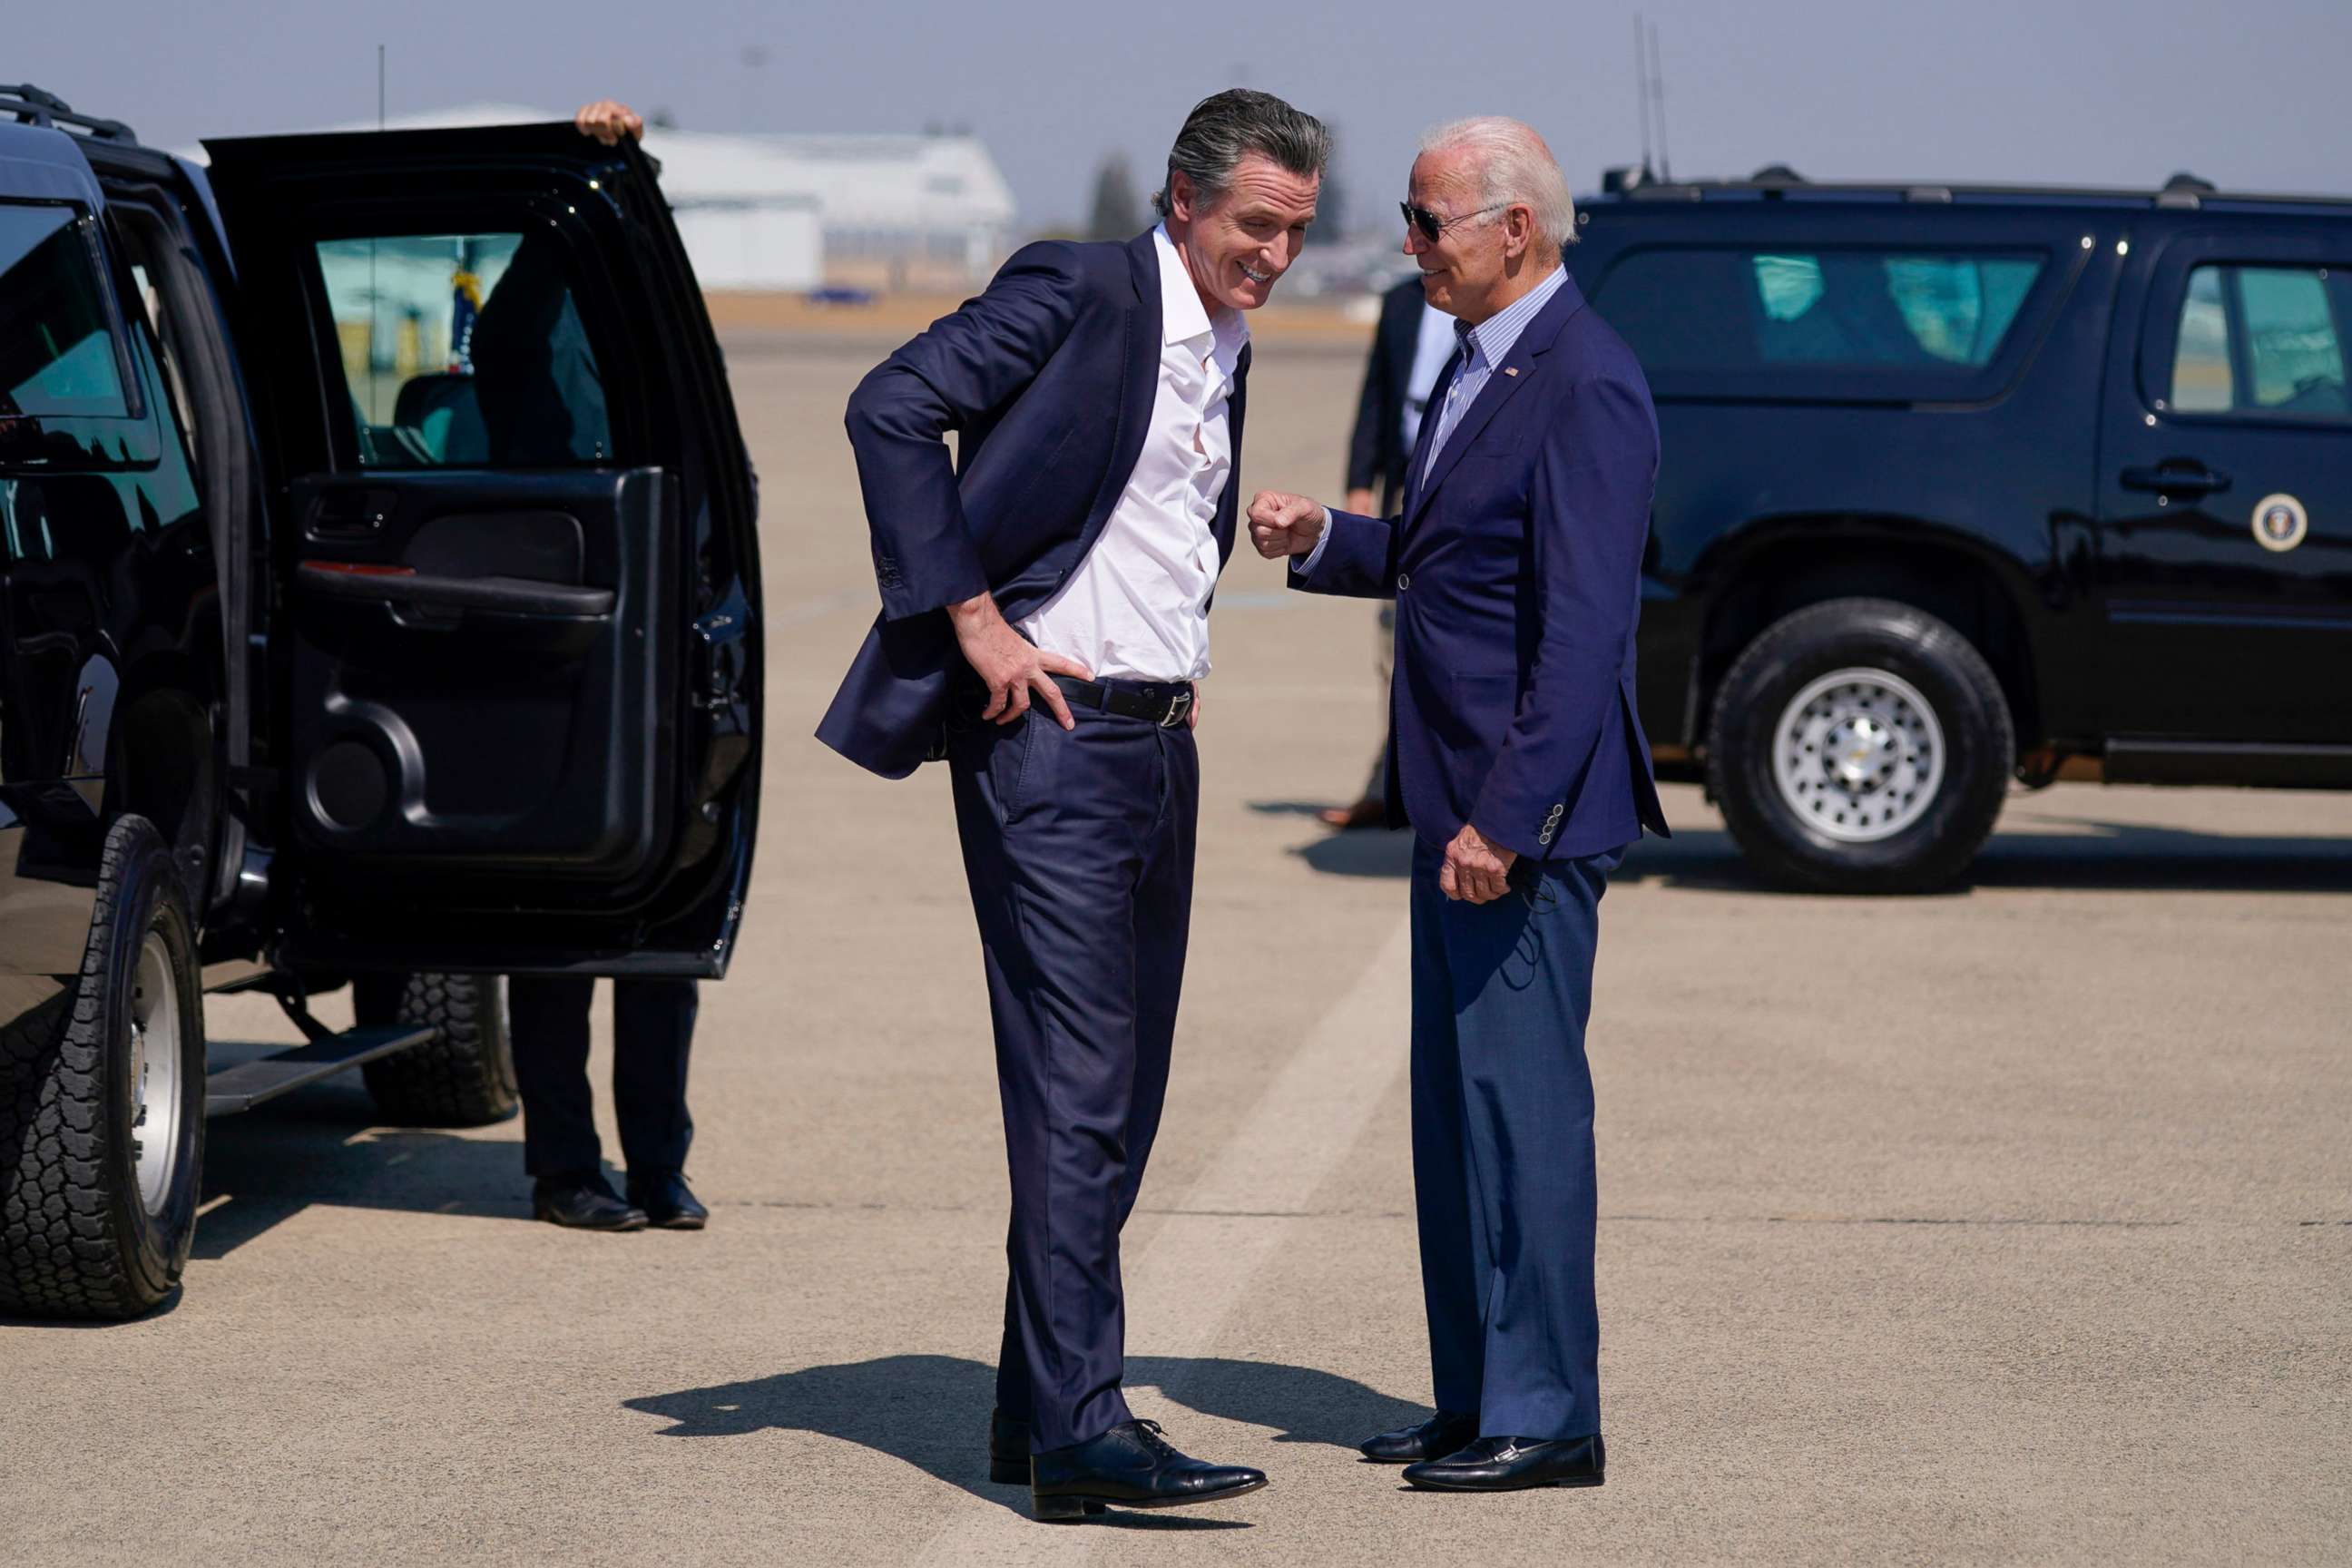 PHOTO: President Joe Biden talks with California Gov. Gavin Newsom as he arrives at Mather Airport on Air Force One, Sept. 13, 2021, in Mather, Calif.